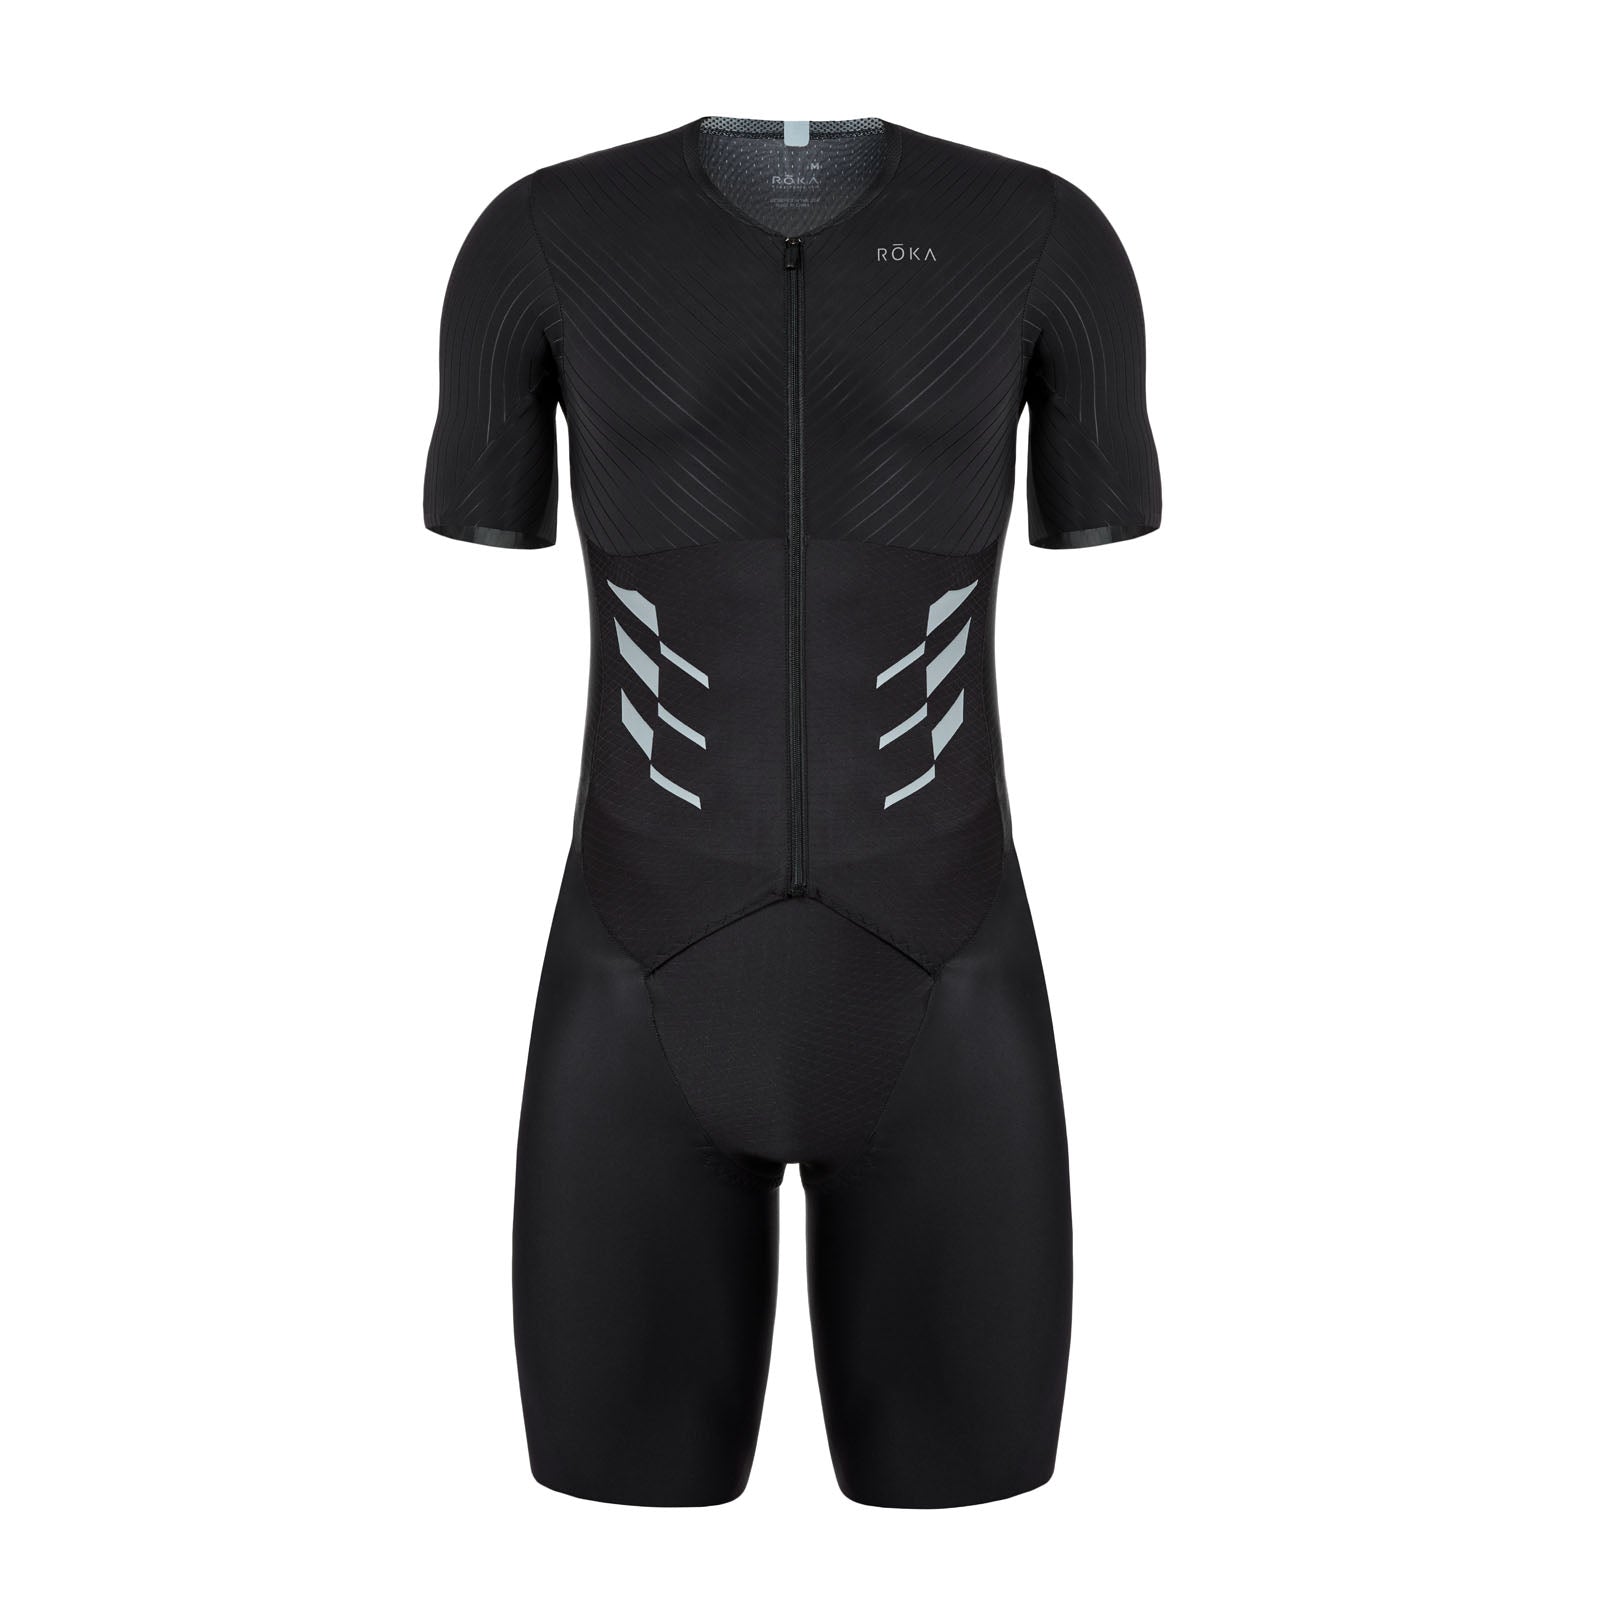 GOLD MEN TRIATHLON S/SLEEVE TWO IN ONE TRI SUIT